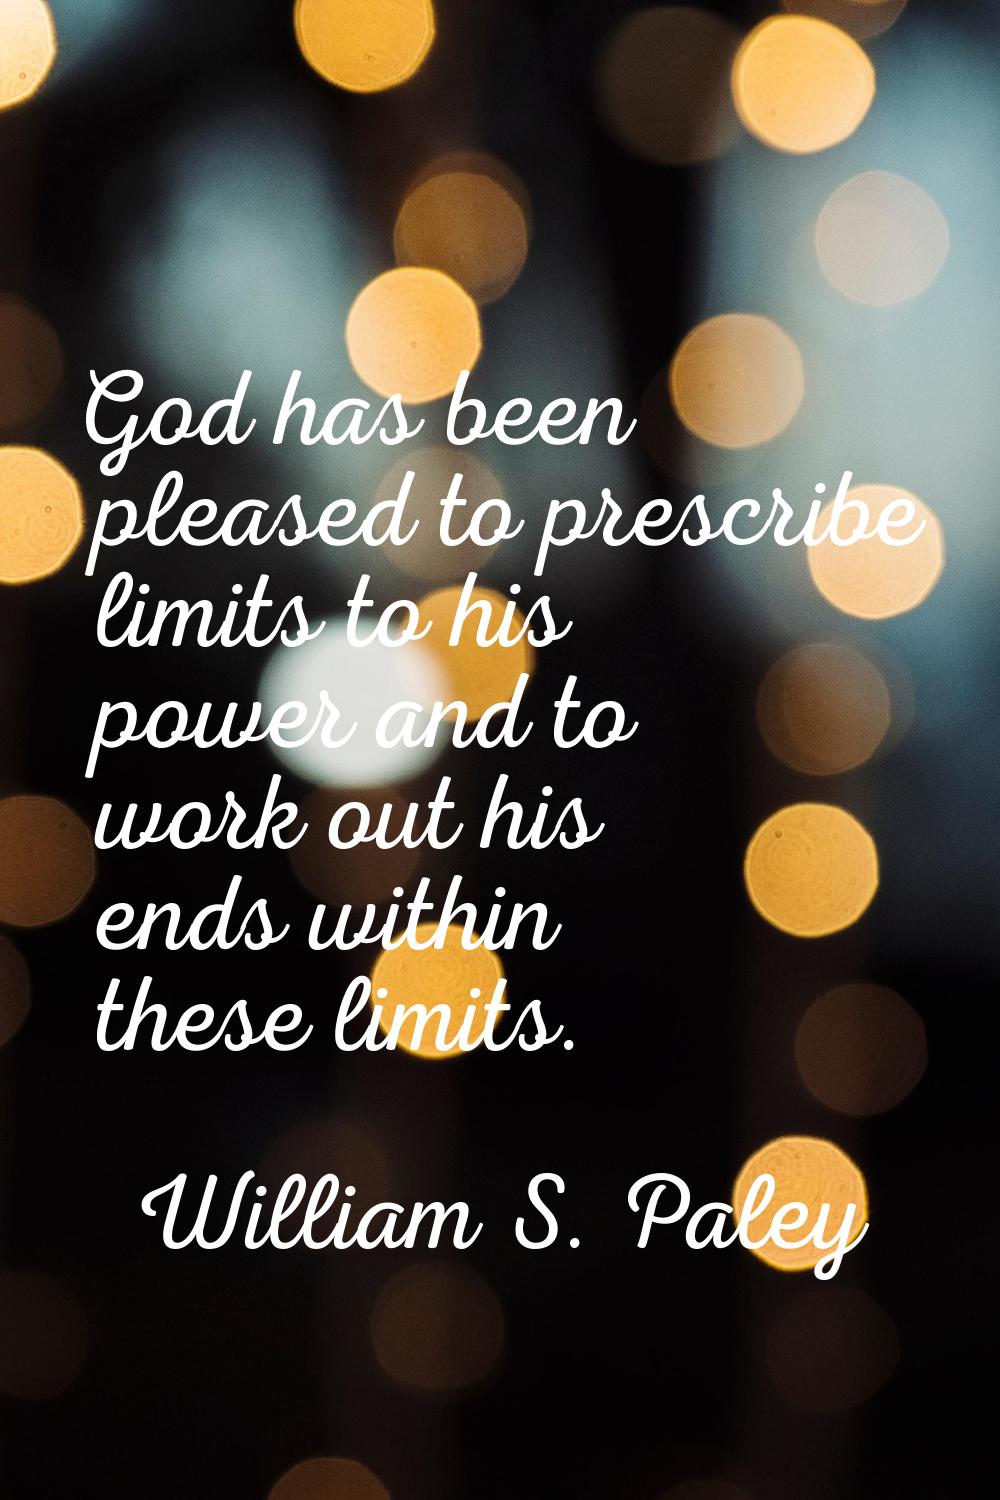 God has been pleased to prescribe limits to his power and to work out his ends within these limits.